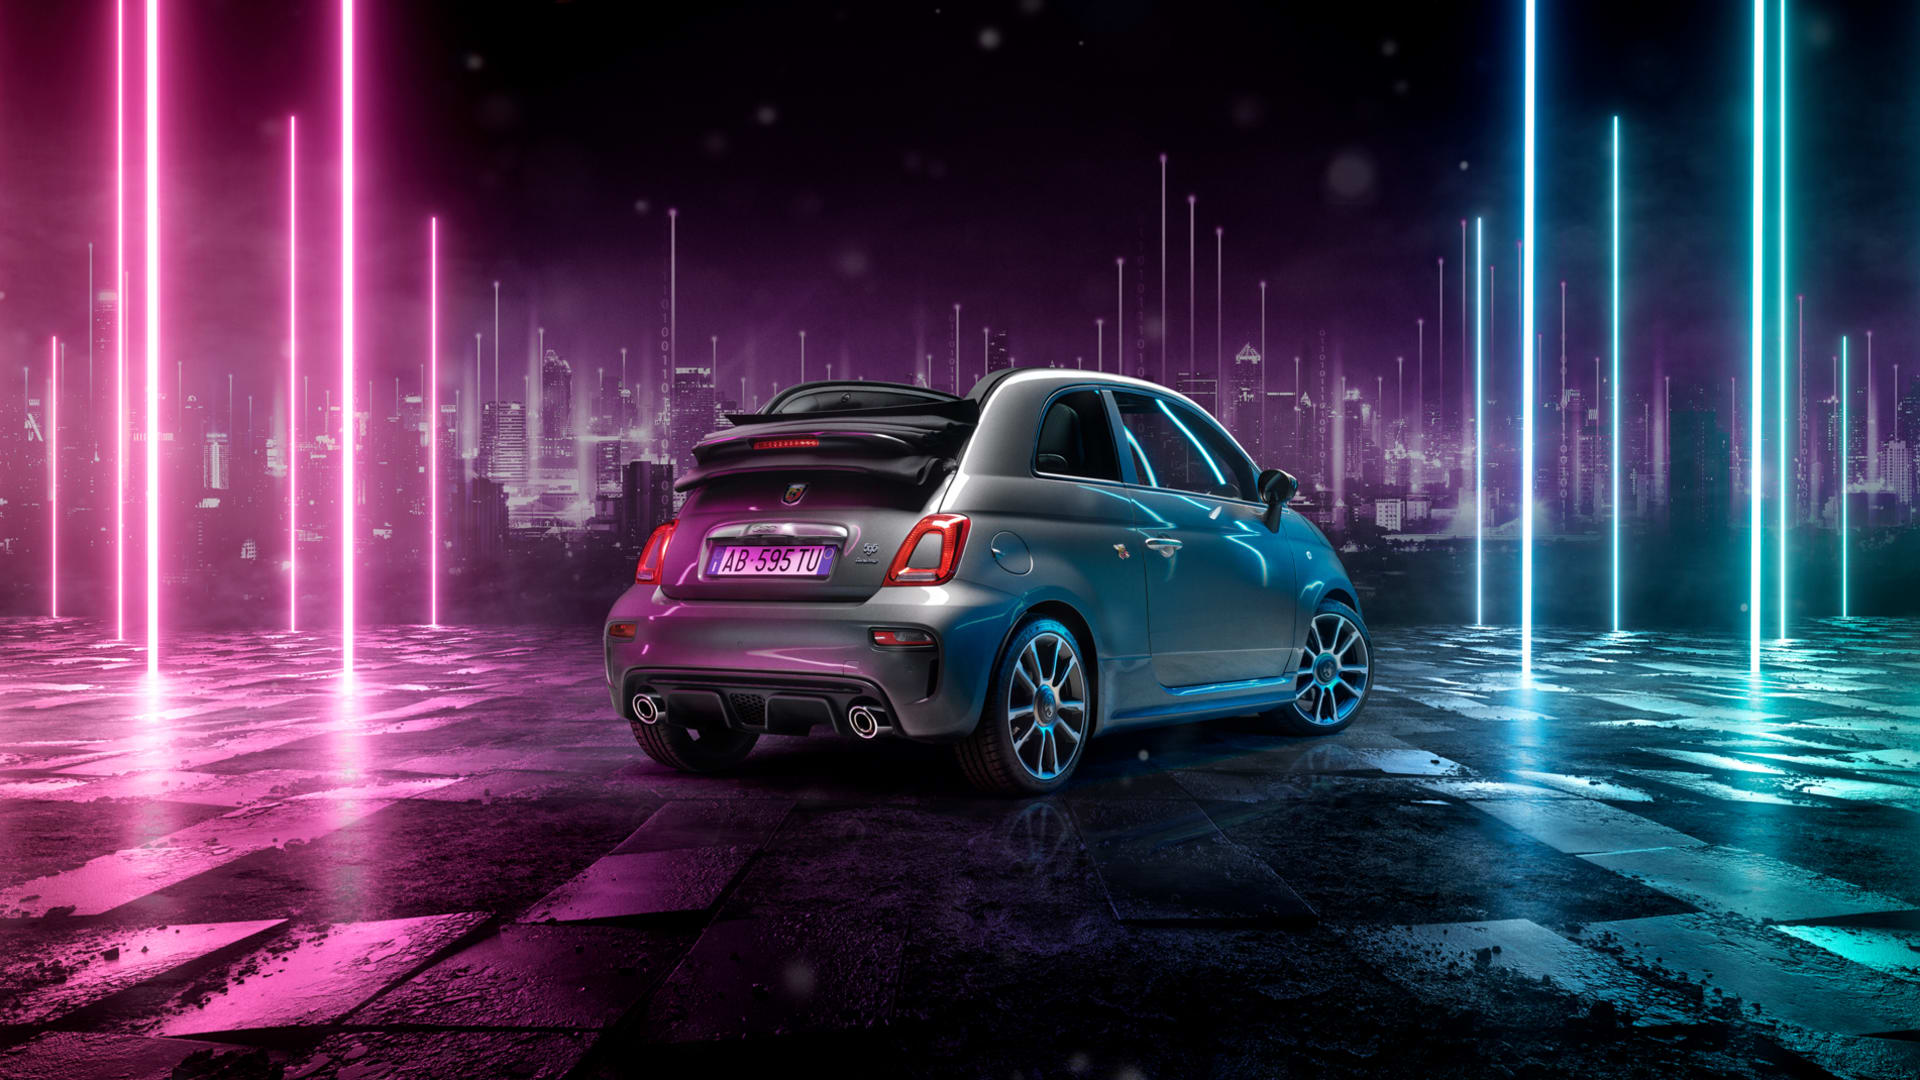 The New Abarth 595